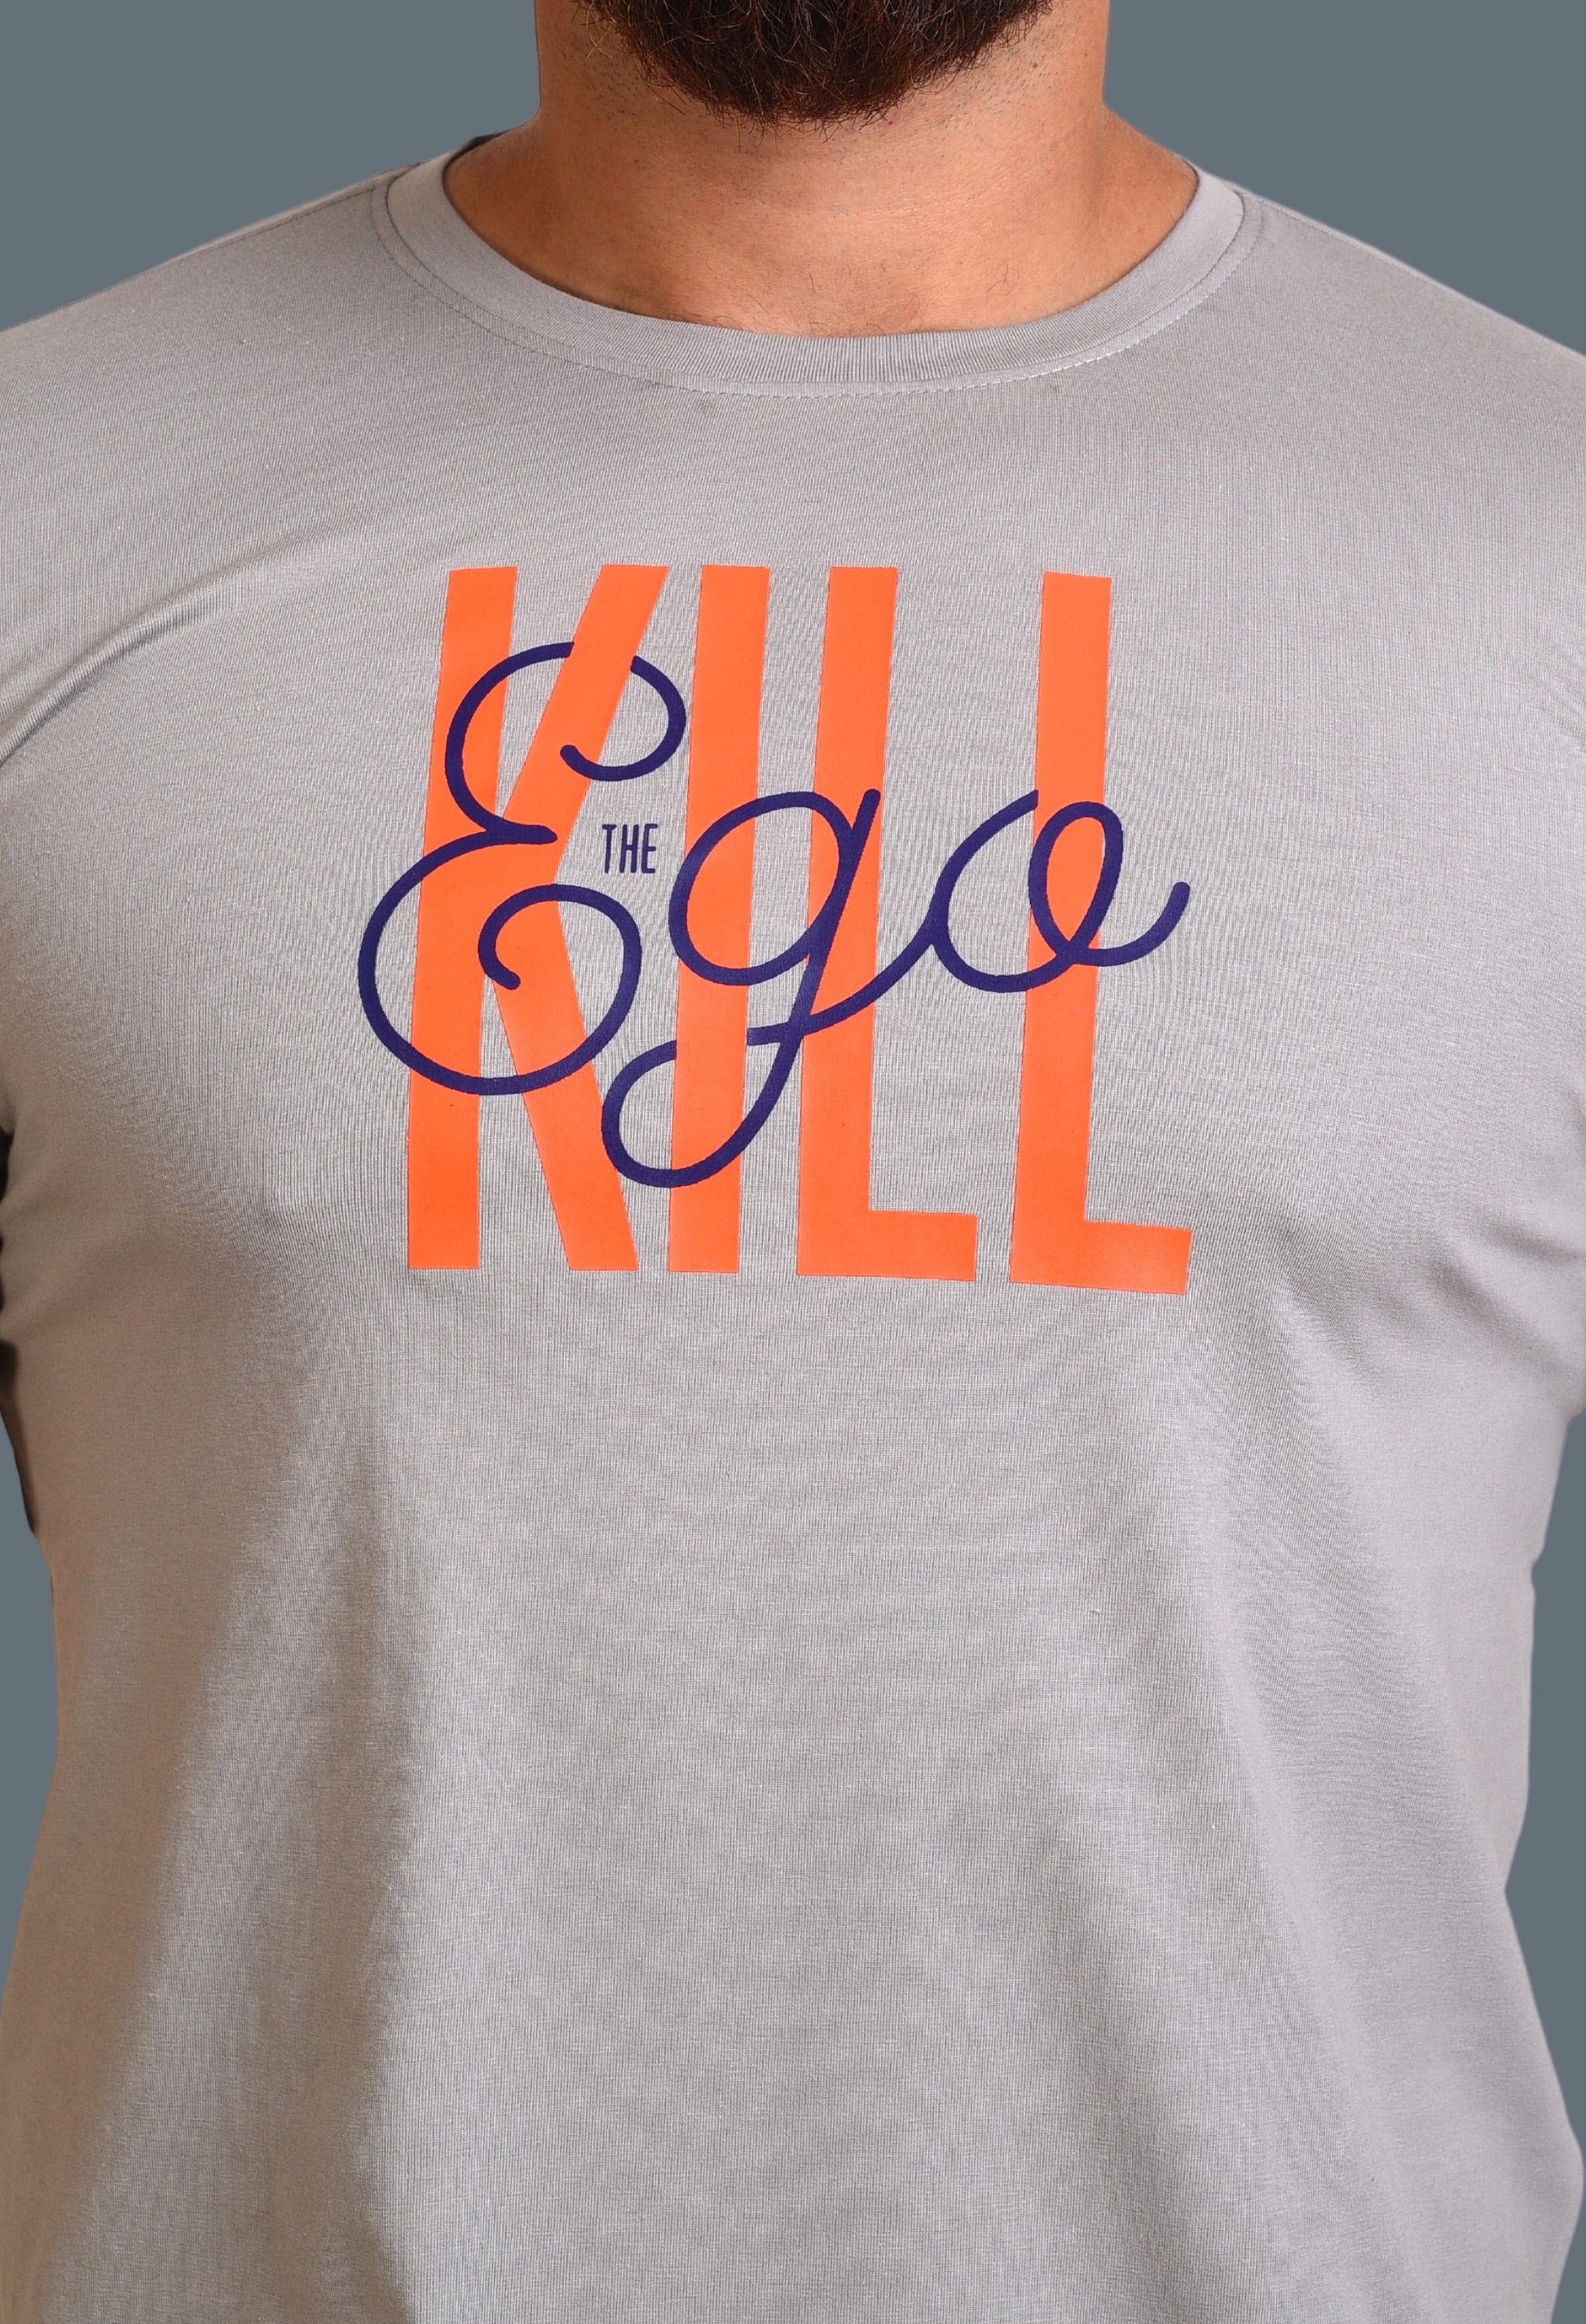 Gym T Shirt - Kill The Ego - Men T-Shirt with premium cotton Lycra. The Sports T Shirt by Strong Soul